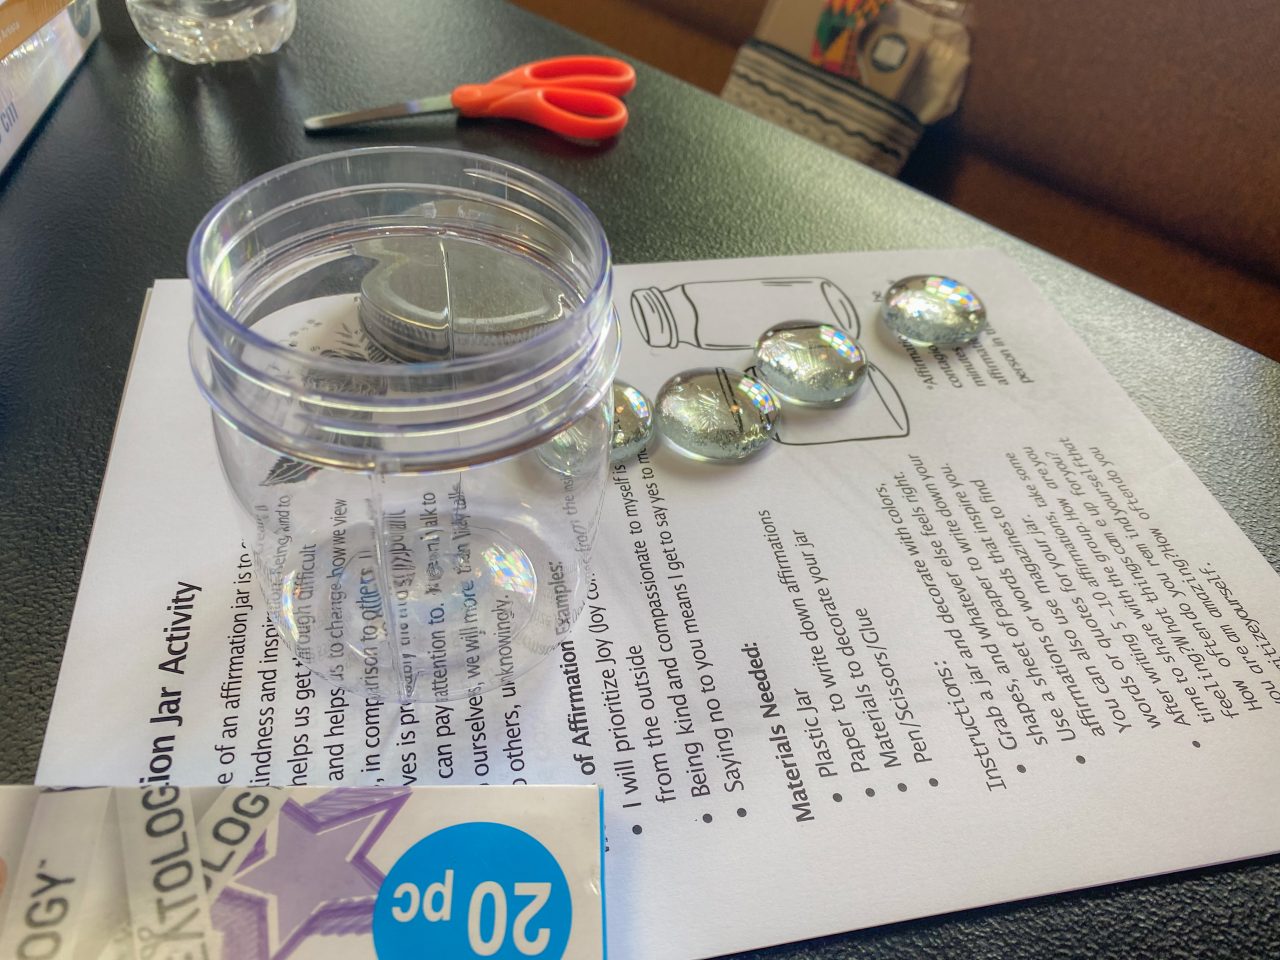 A glass jar, scissors, and glass beads on paper across a table